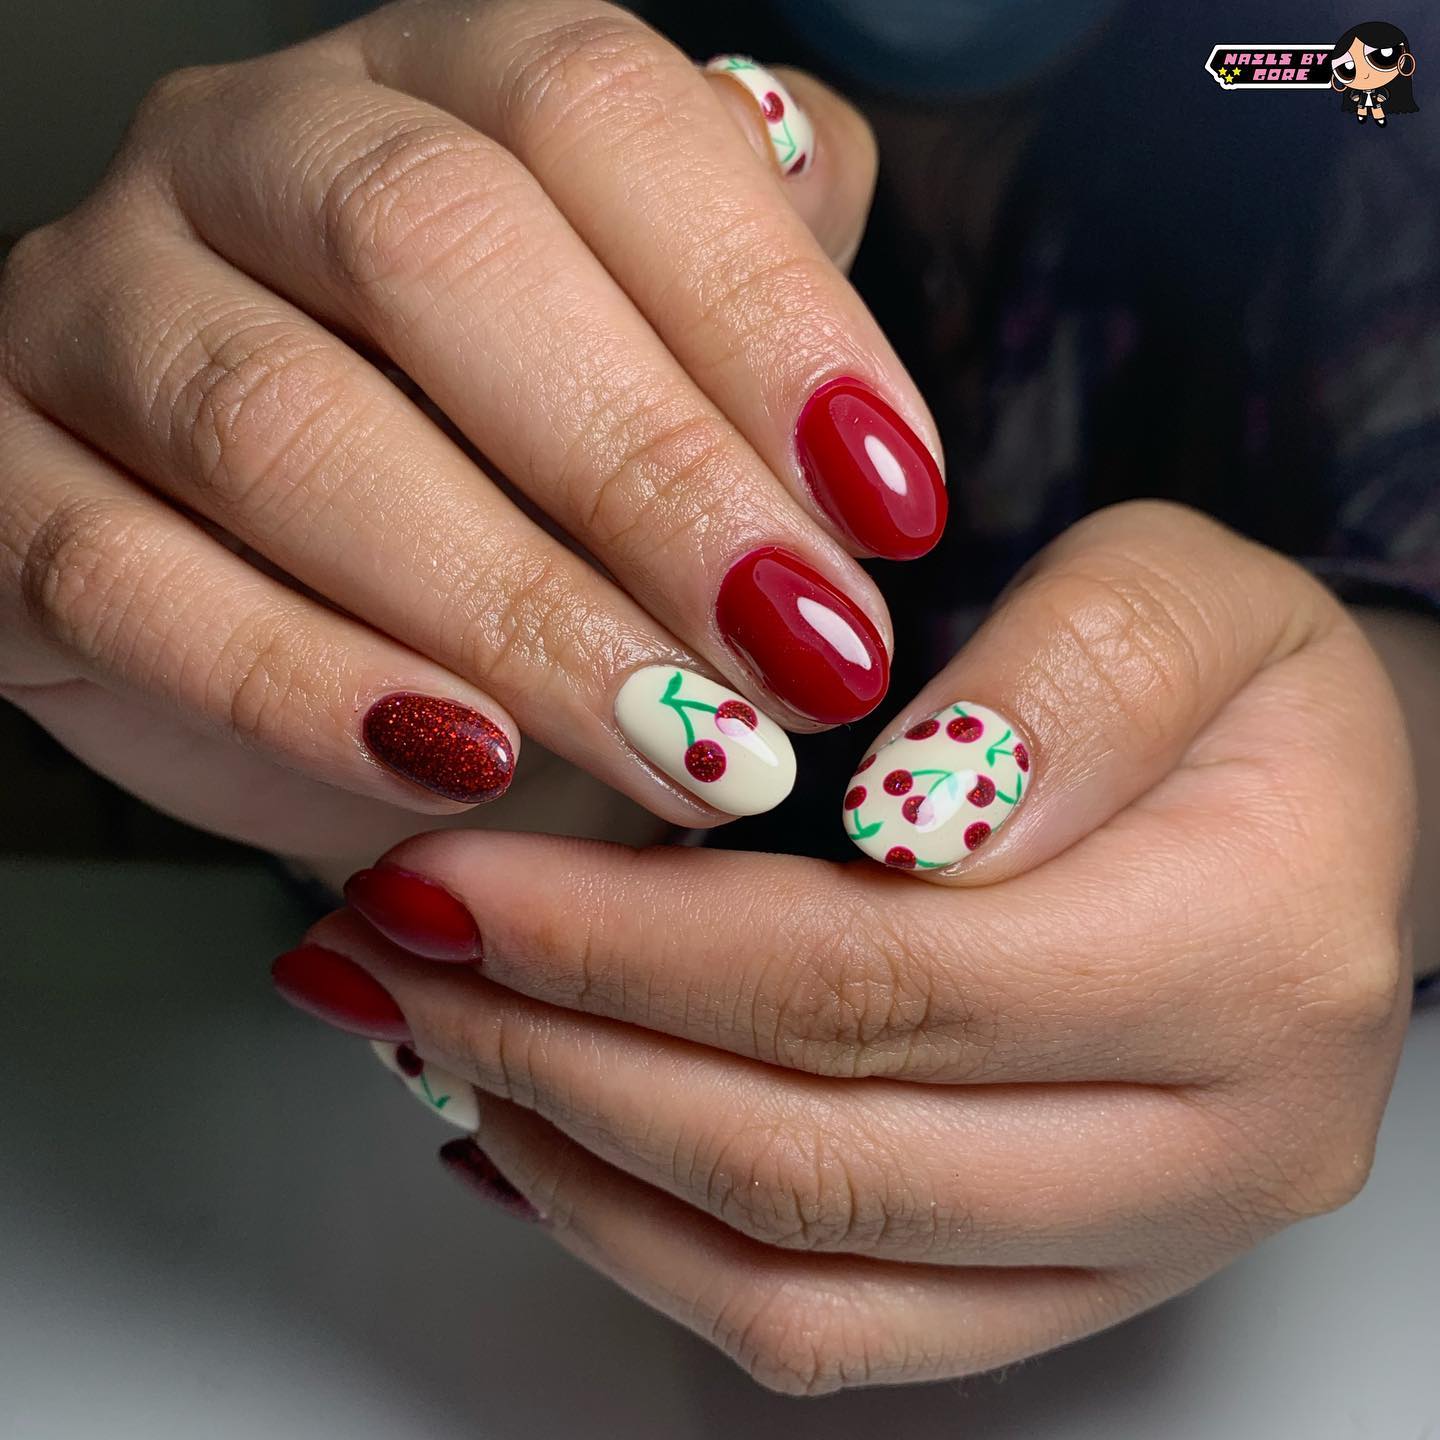 Short Red and White Nails with Cherries and Glitter